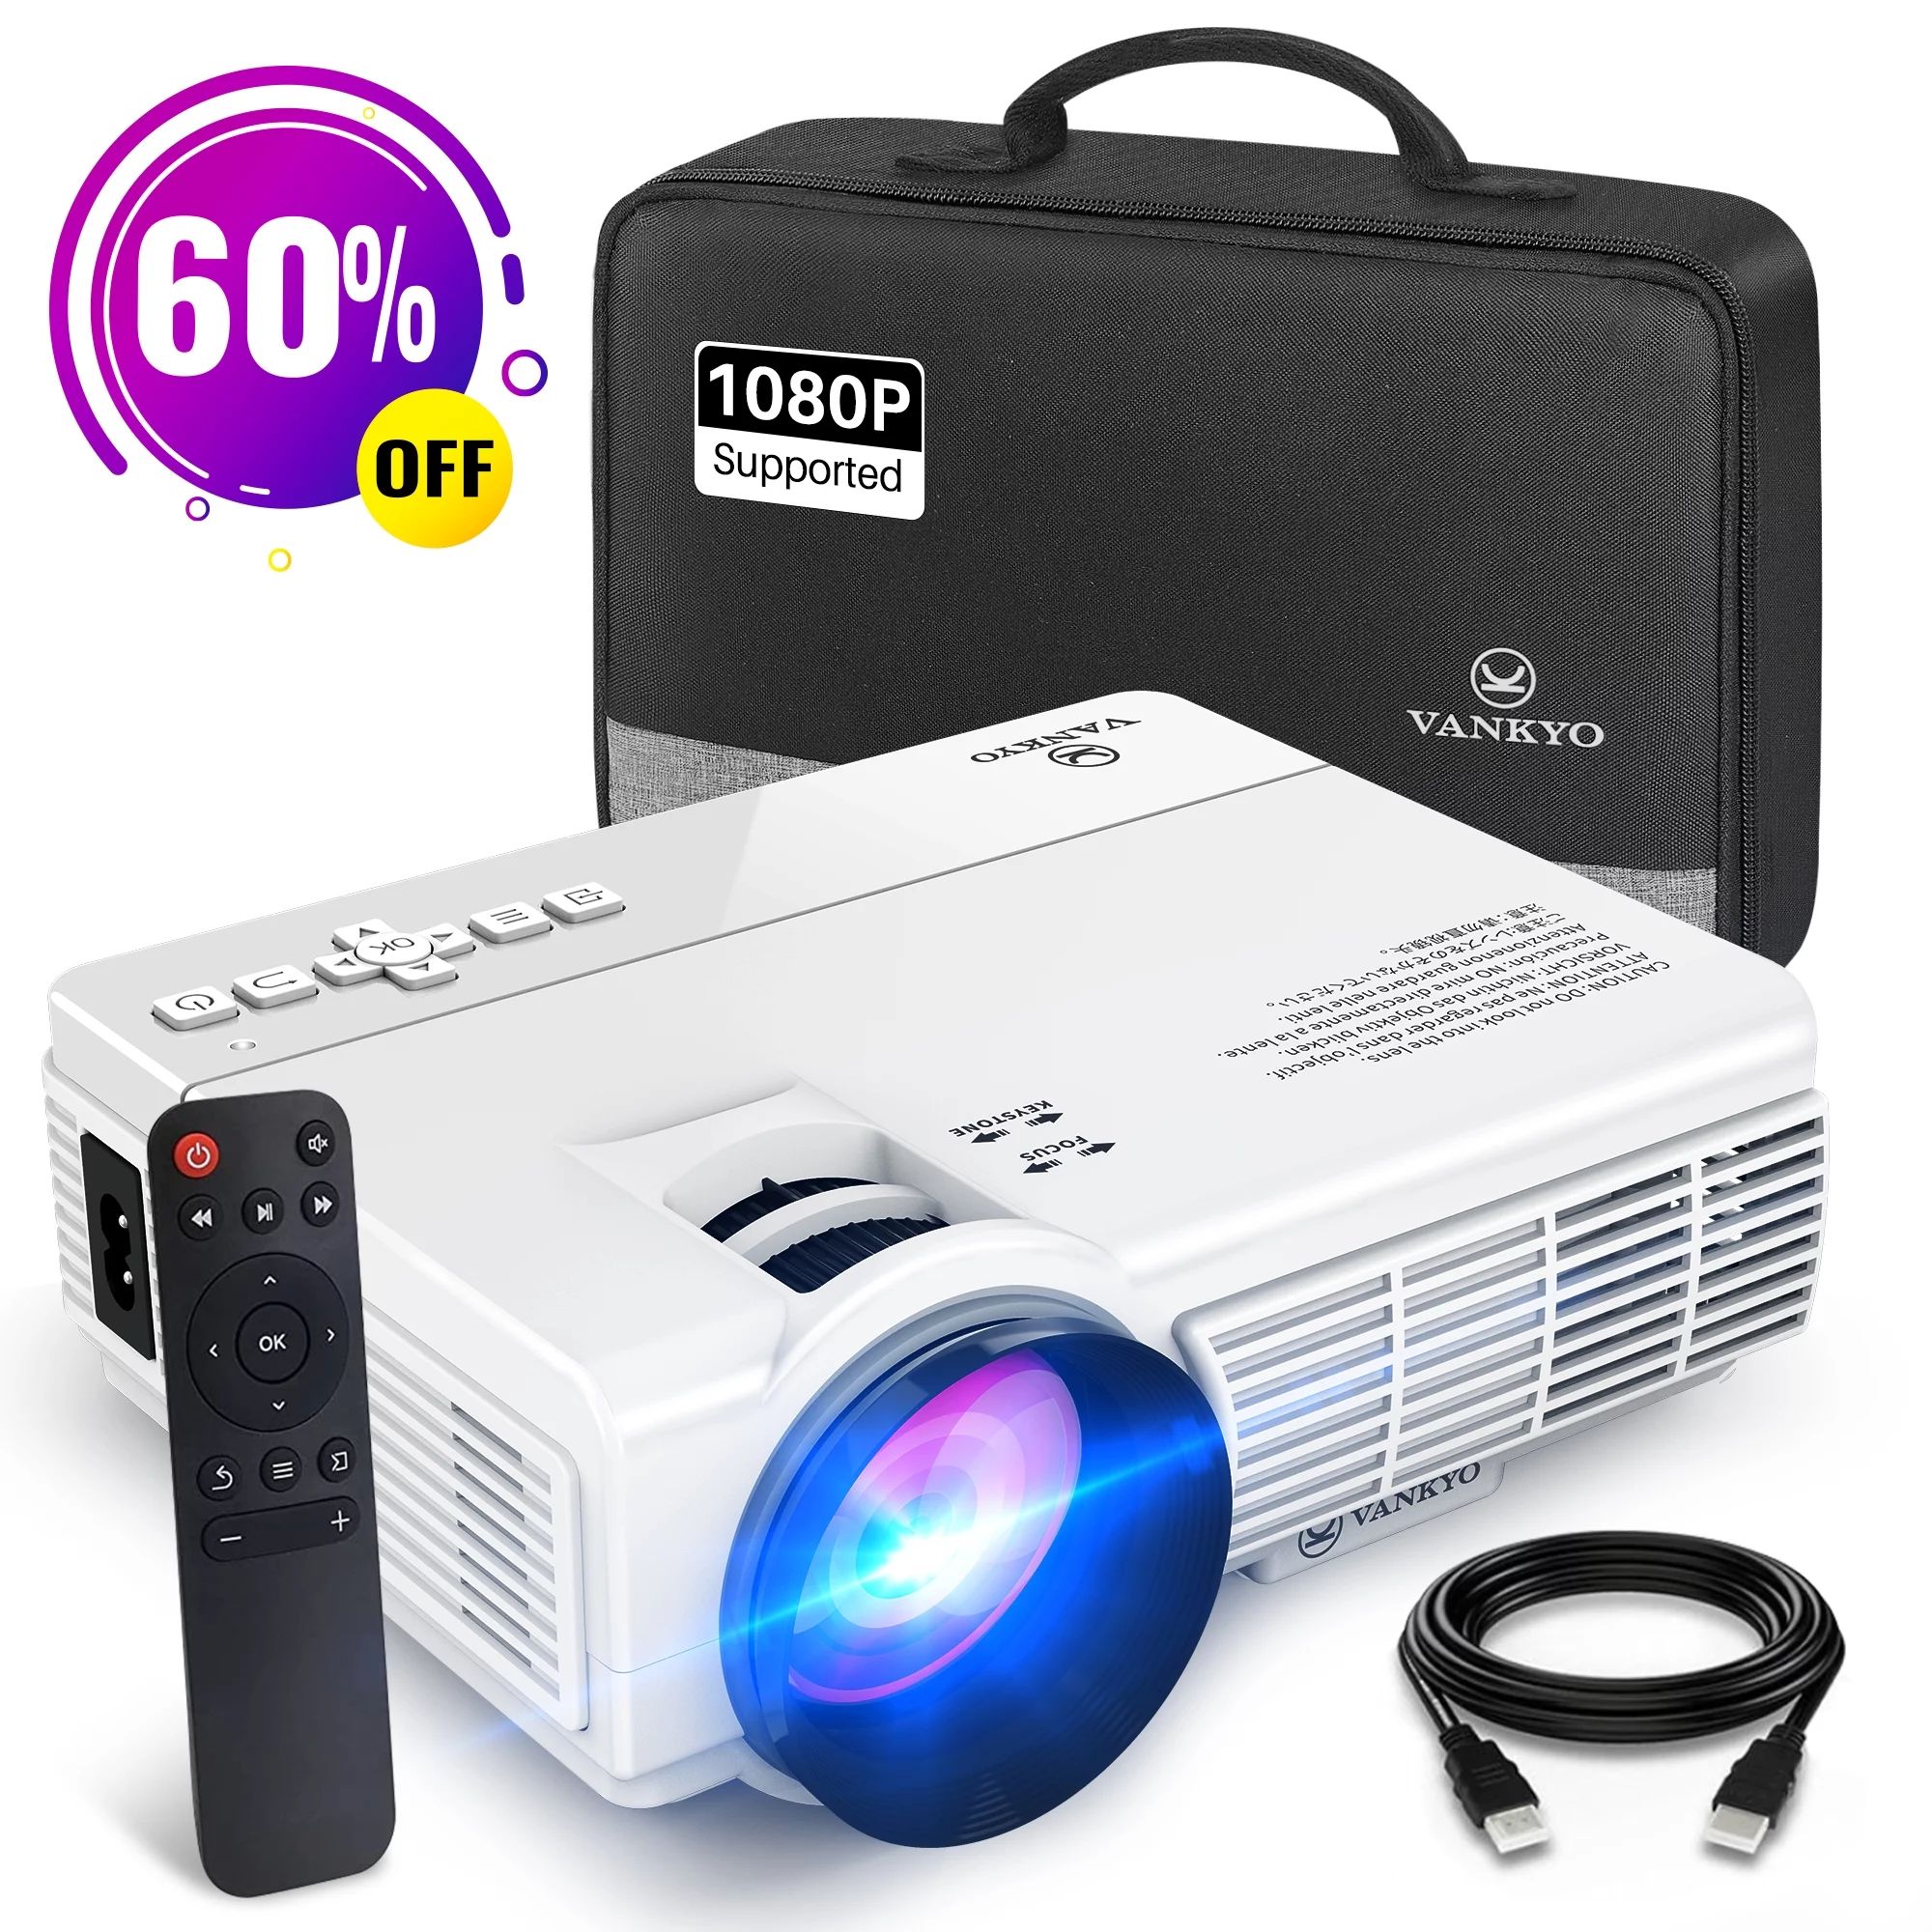 VANKYO Leisure 3 1080P Supported Mini Projector with 65000 Hours Lamp Life, LED Portable Projecto... | Walmart (US)